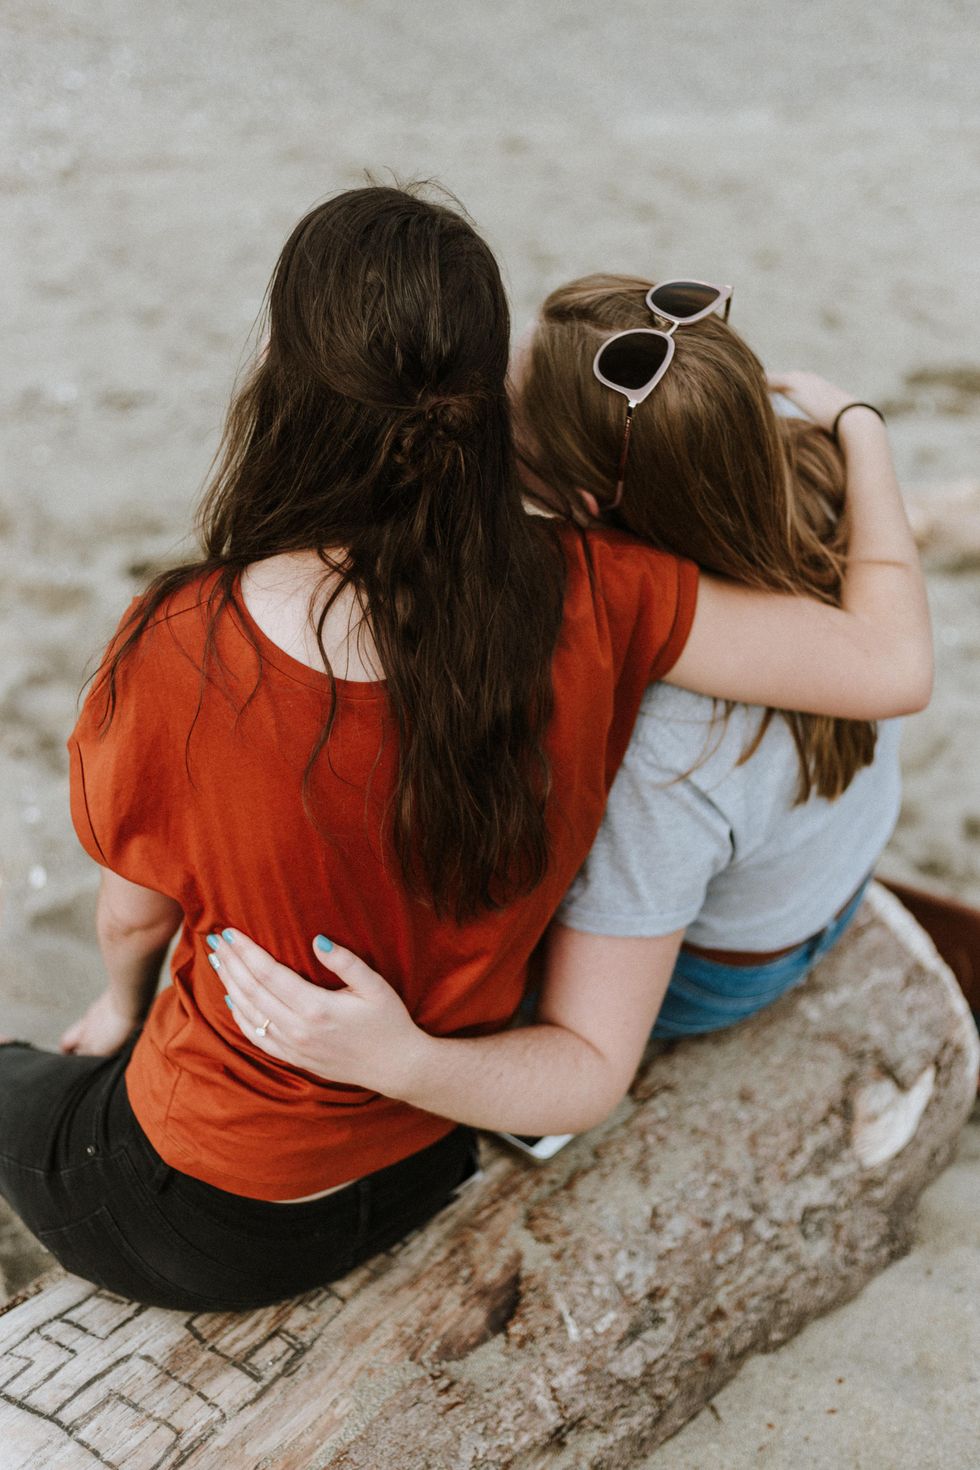 6 Ways To Thoughtfully Support Your Friends Without Sacrificing Your Own Mental Health